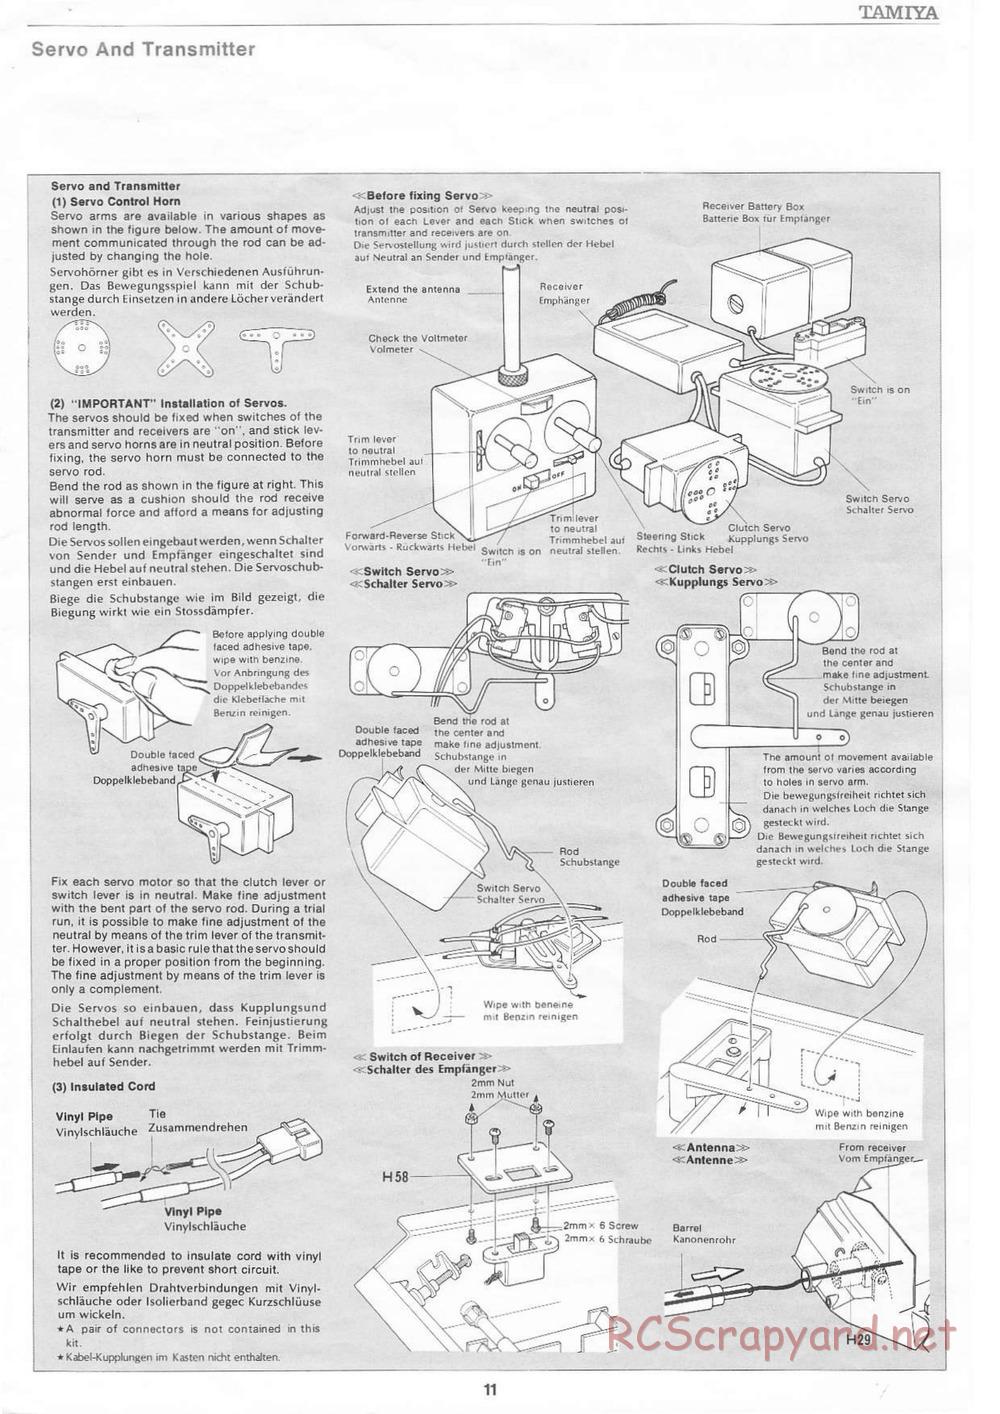 Tamiya - Leopard A4 - 1/16 Scale Chassis - Manual - Page 11